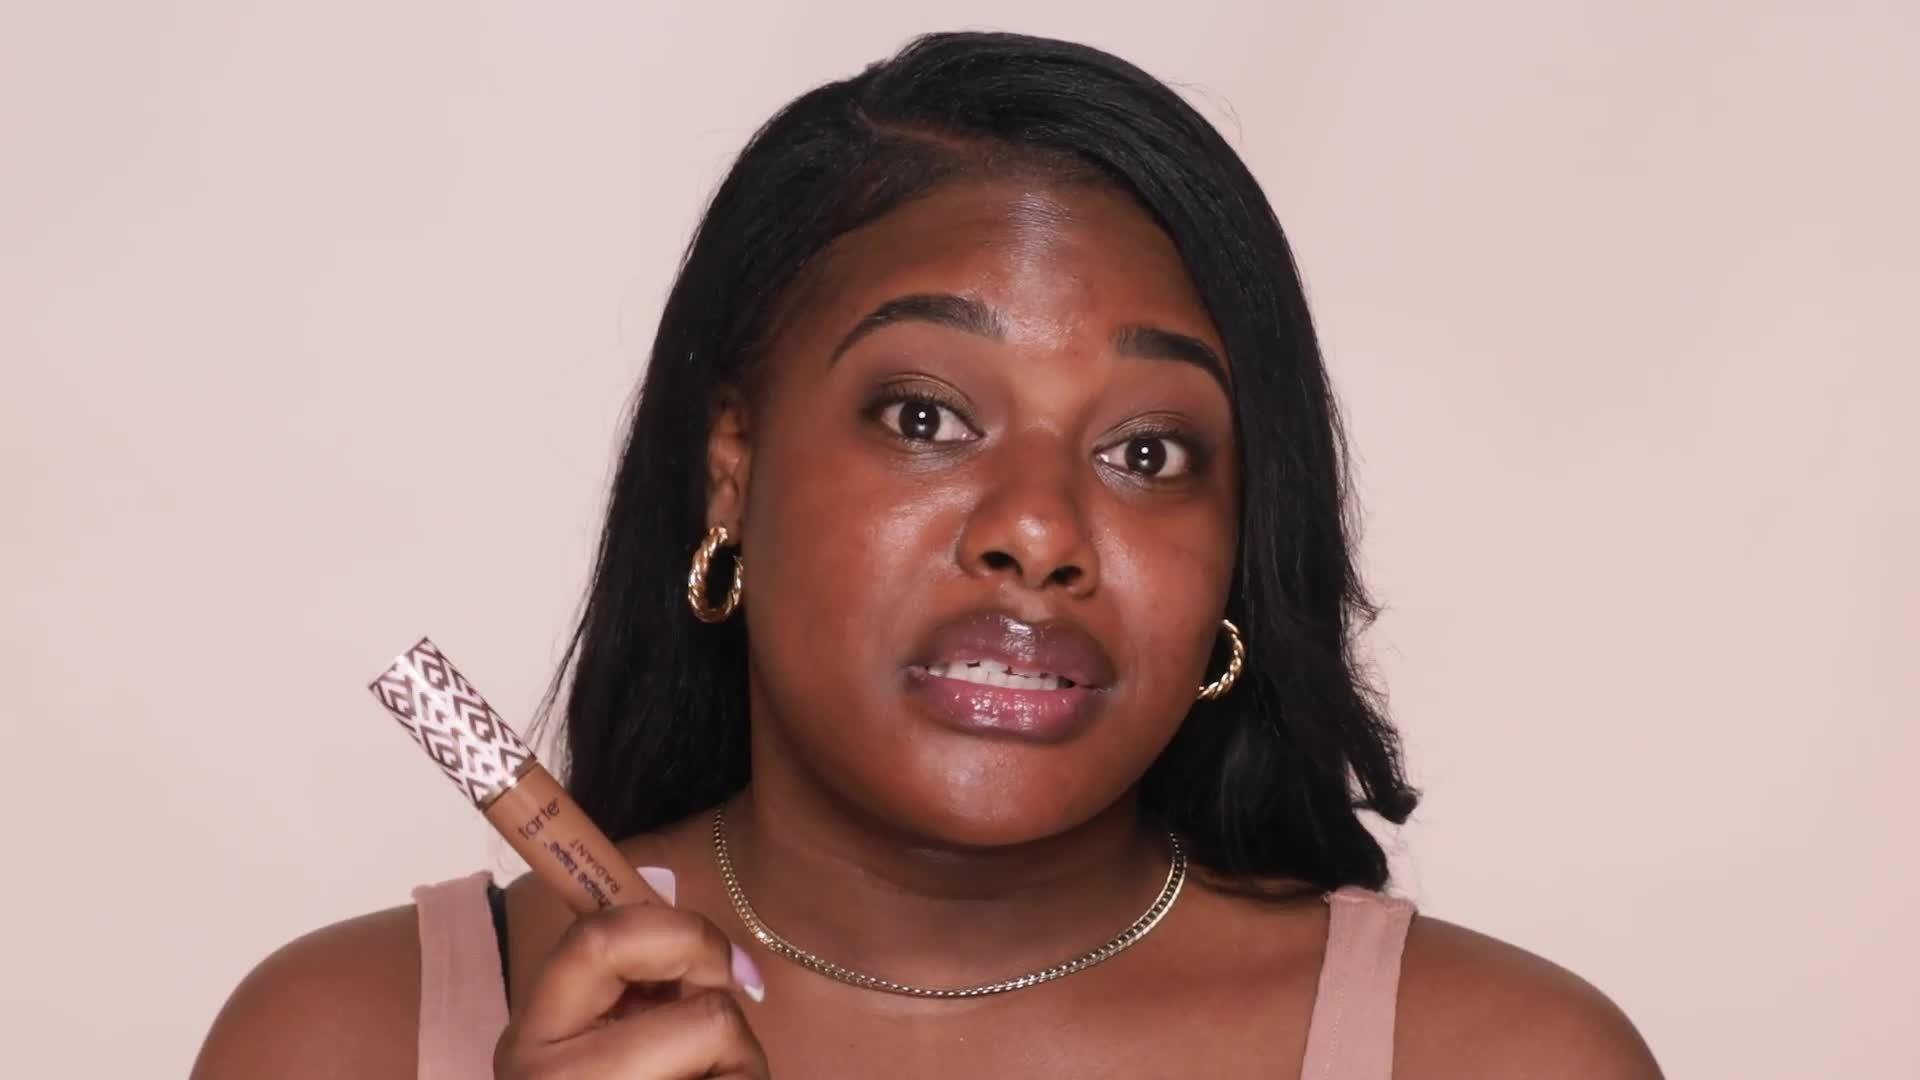 Tarte has a new version of the Shape Tape concealer called Radiant